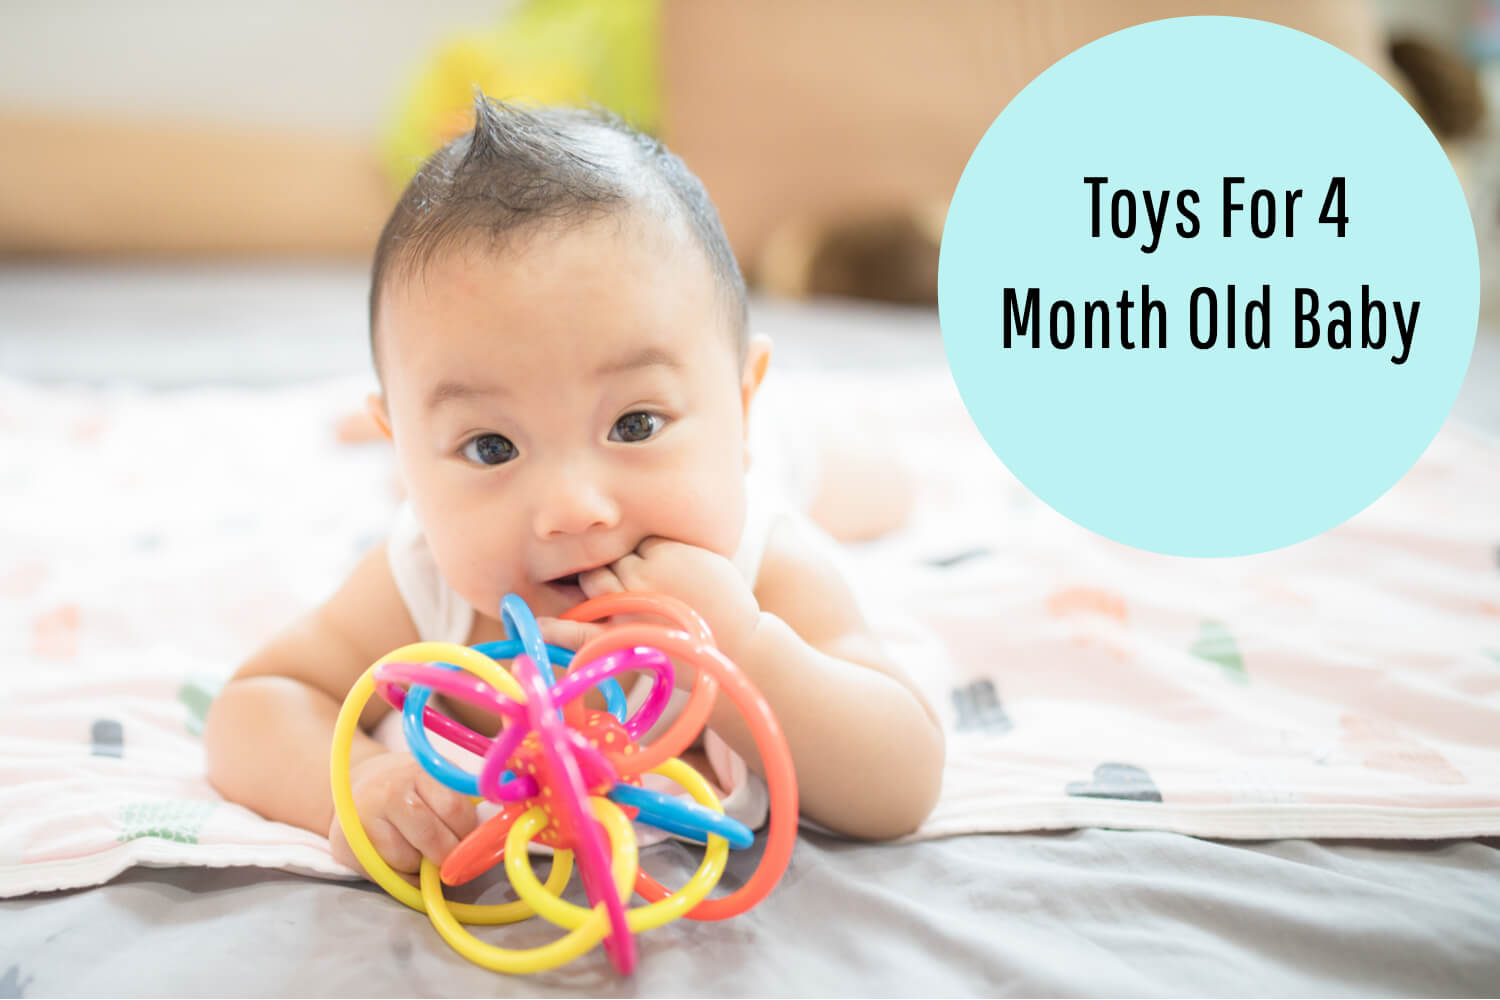 Toys For 4 Month Old Baby – Types, Benefits and What to Buy